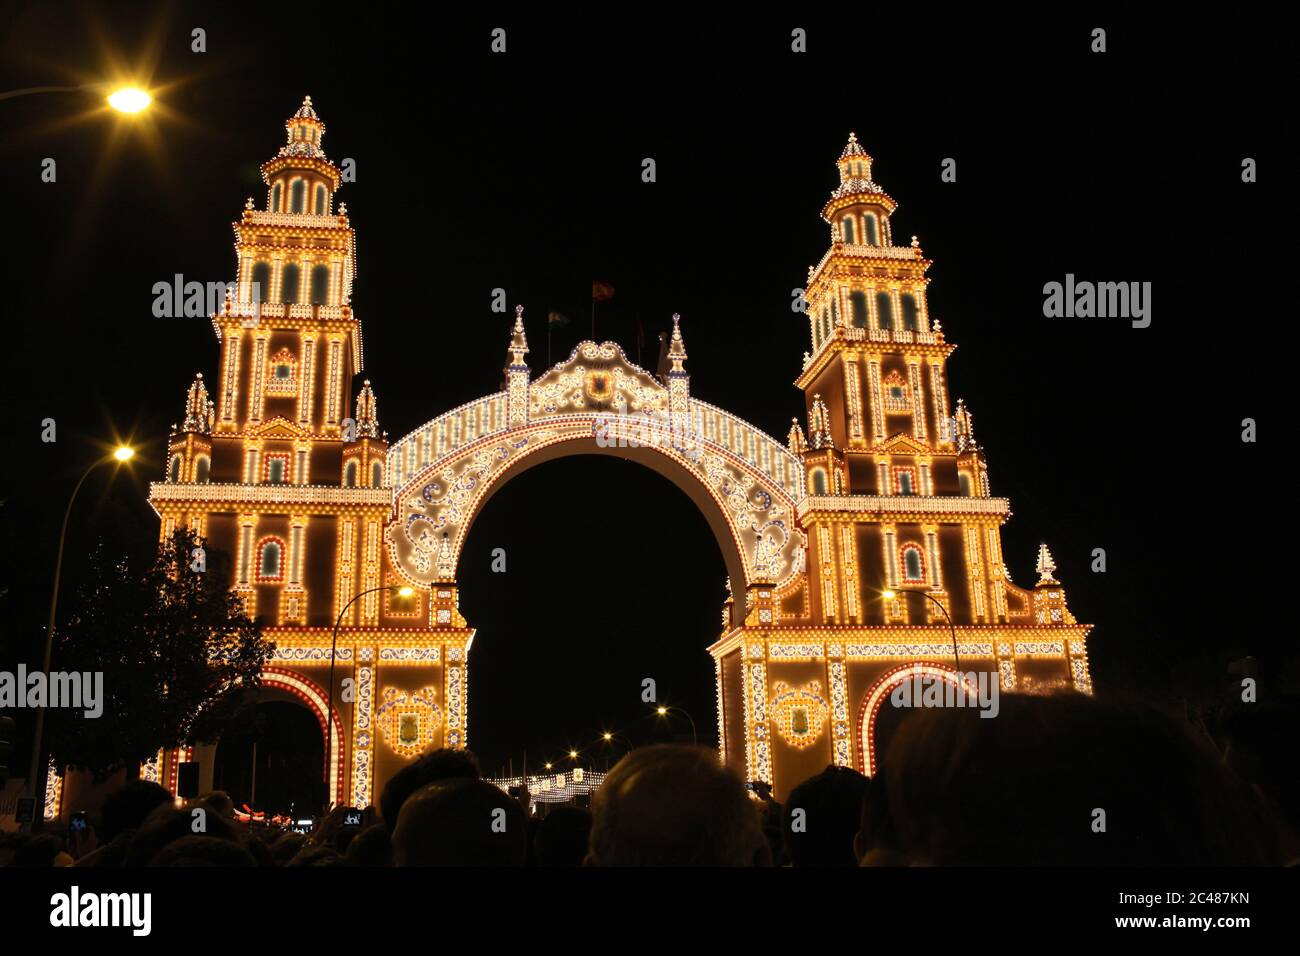 SEVILLE, SPAIN - Apr 16, 2013: Building with lights made for feria de abril in Seville, Spain Stock Photo